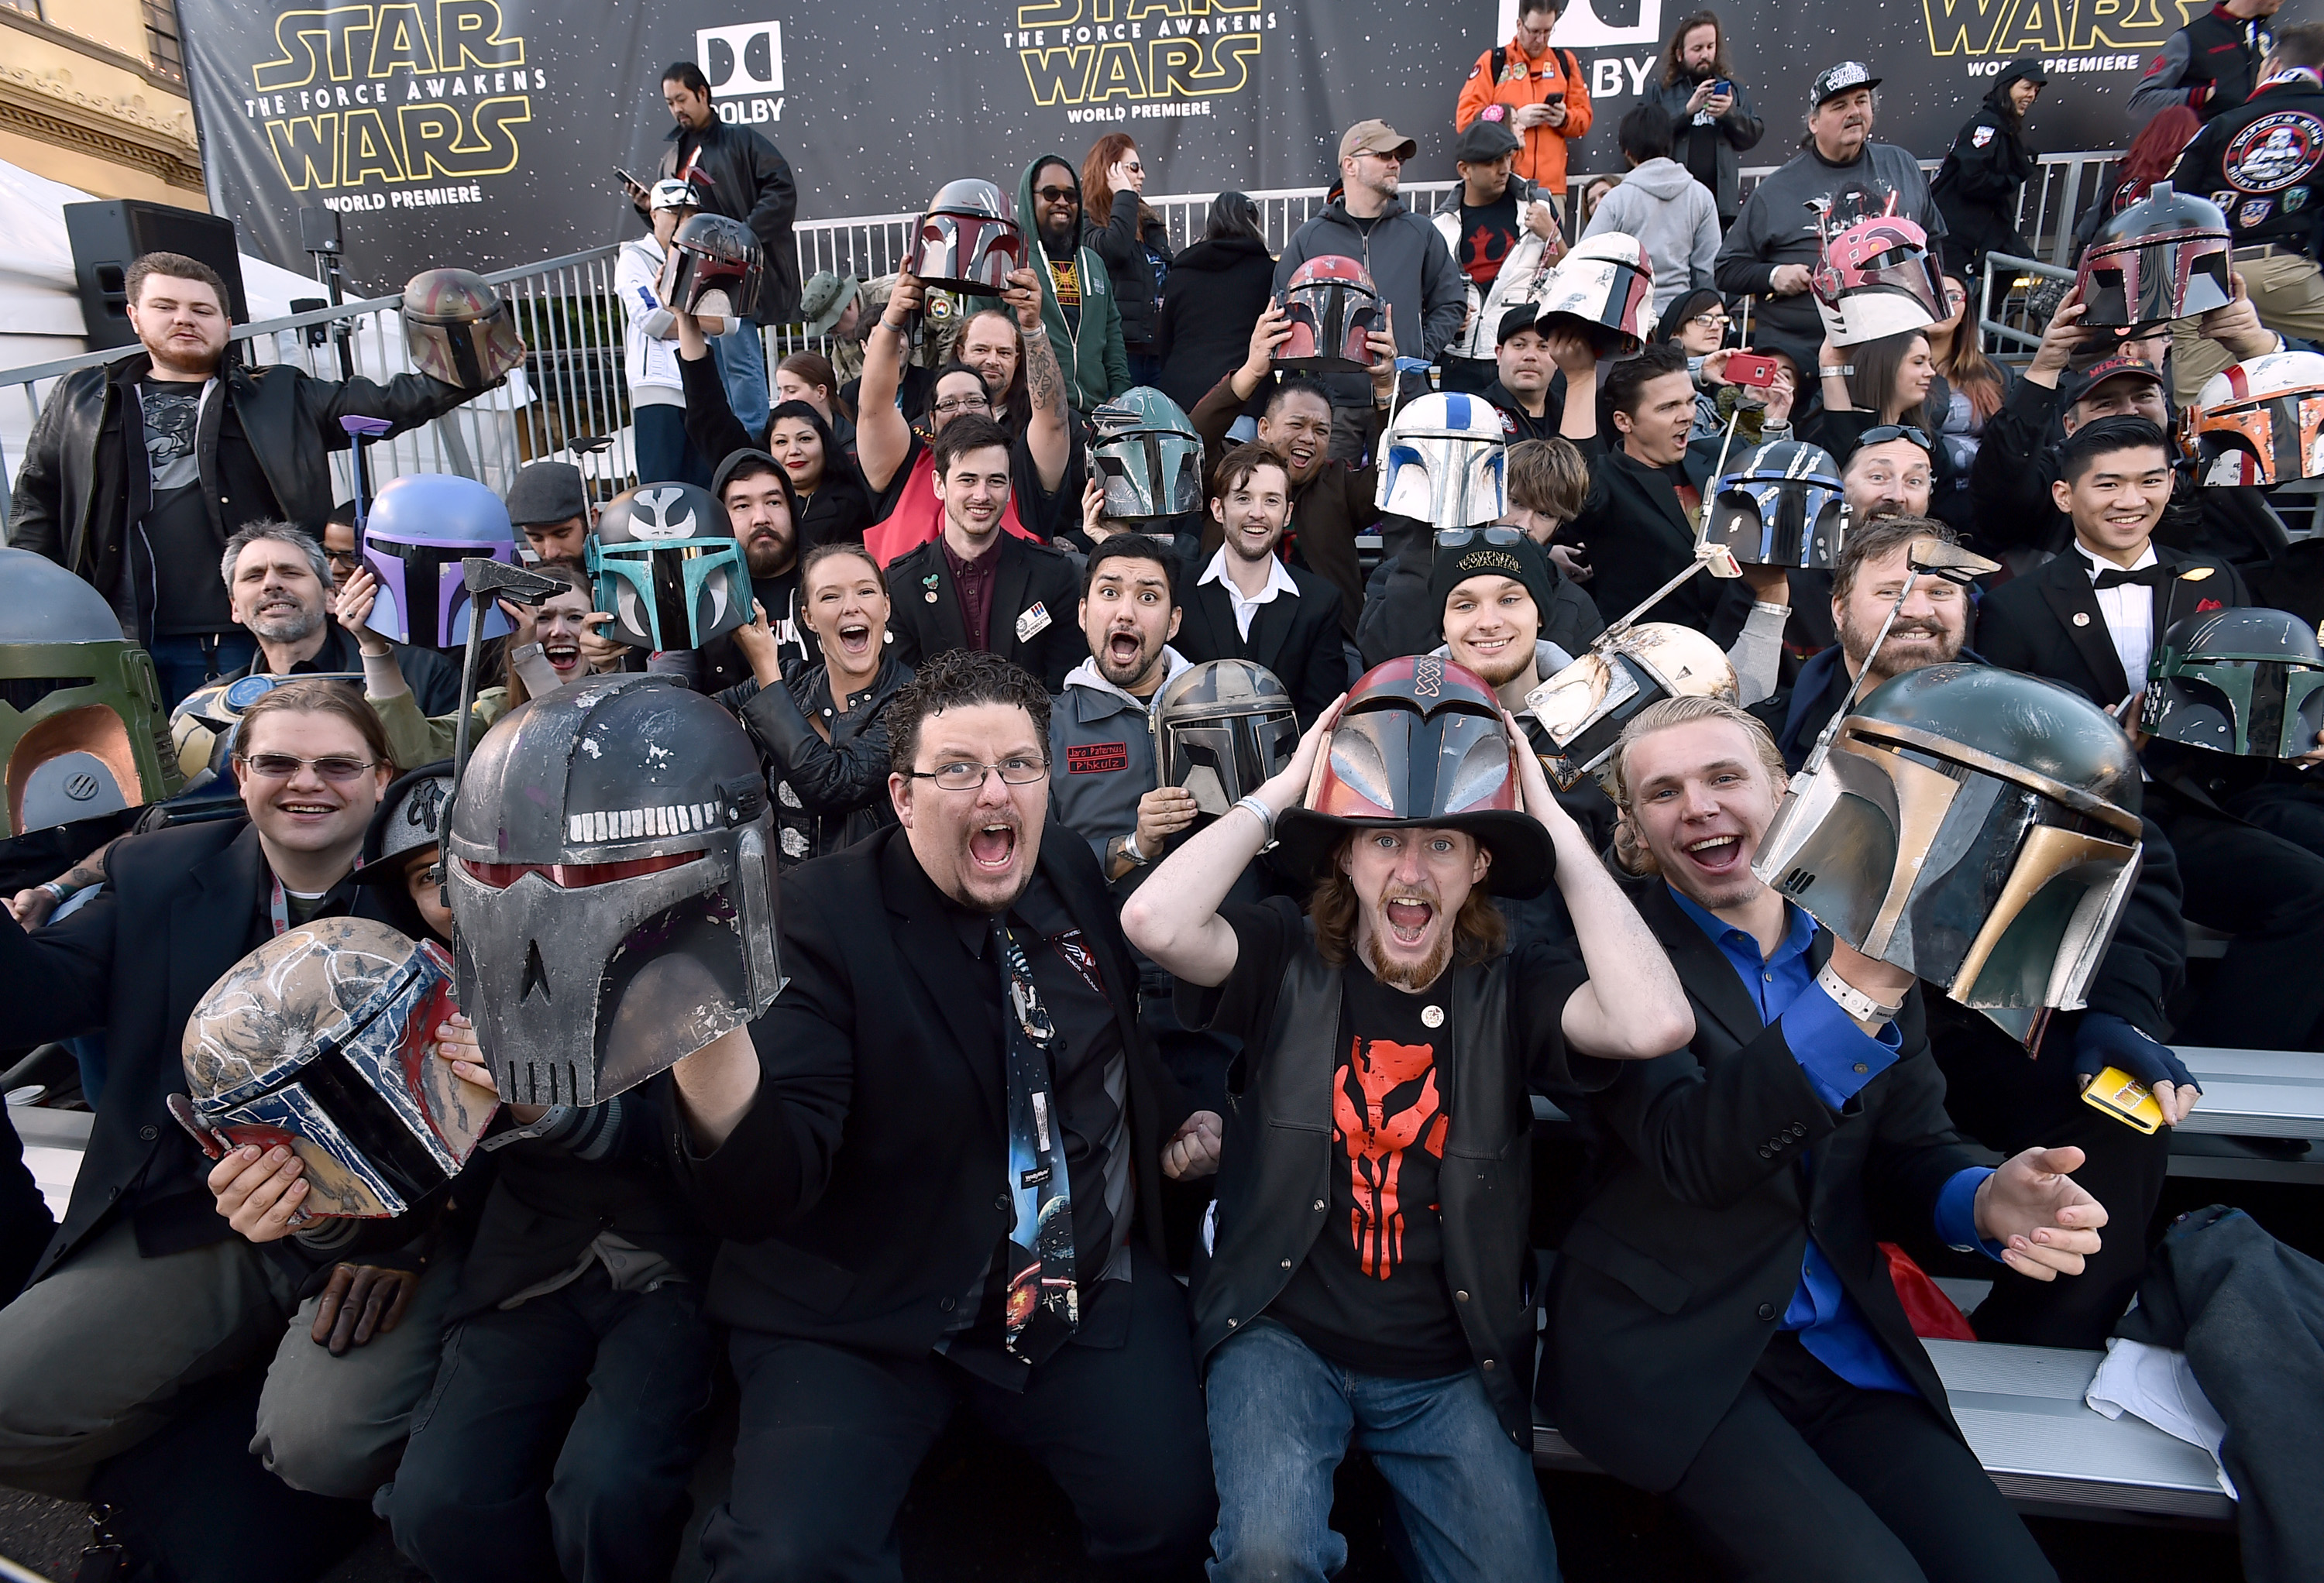 FILE - In this Monday, Dec. 14, 2015 file photo, fans cheer in the stands at world premiere of "Star Wars: The Force Awakens" at the TCL Chinese Theatre in Los Angeles. Early screenings of the film begin Thursday night, Dec. 17, 2015. (Photo by Jordan Strauss/Invision/AP, File)